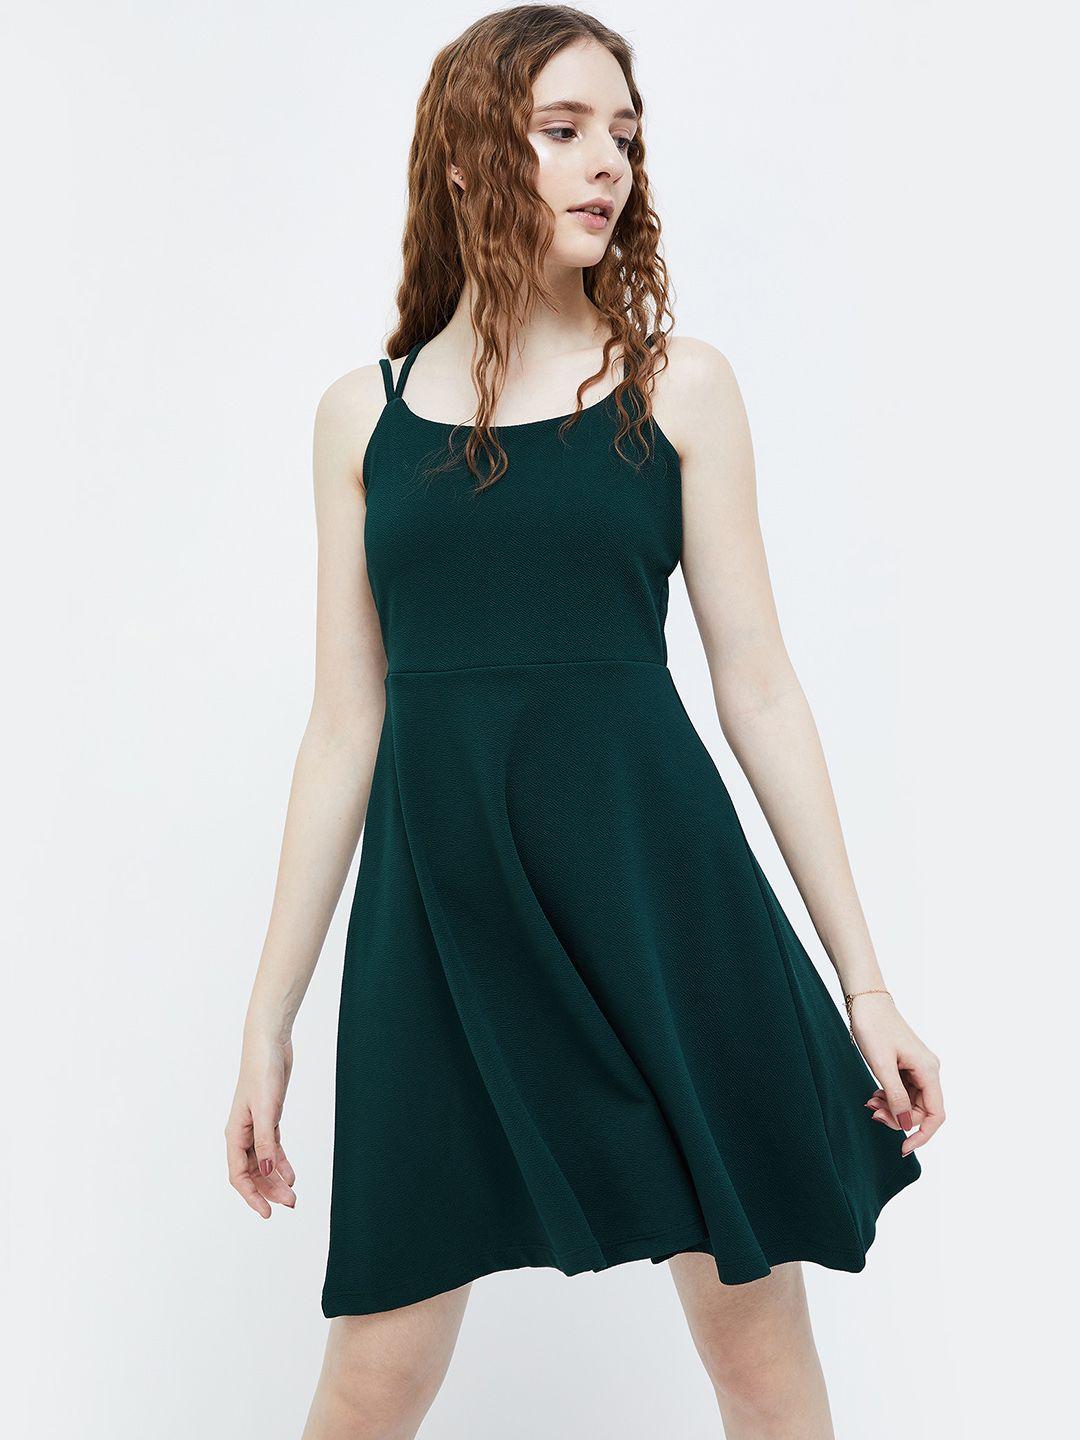 ginger-by-lifestyle-sleeveless-fit-&-flare-dress